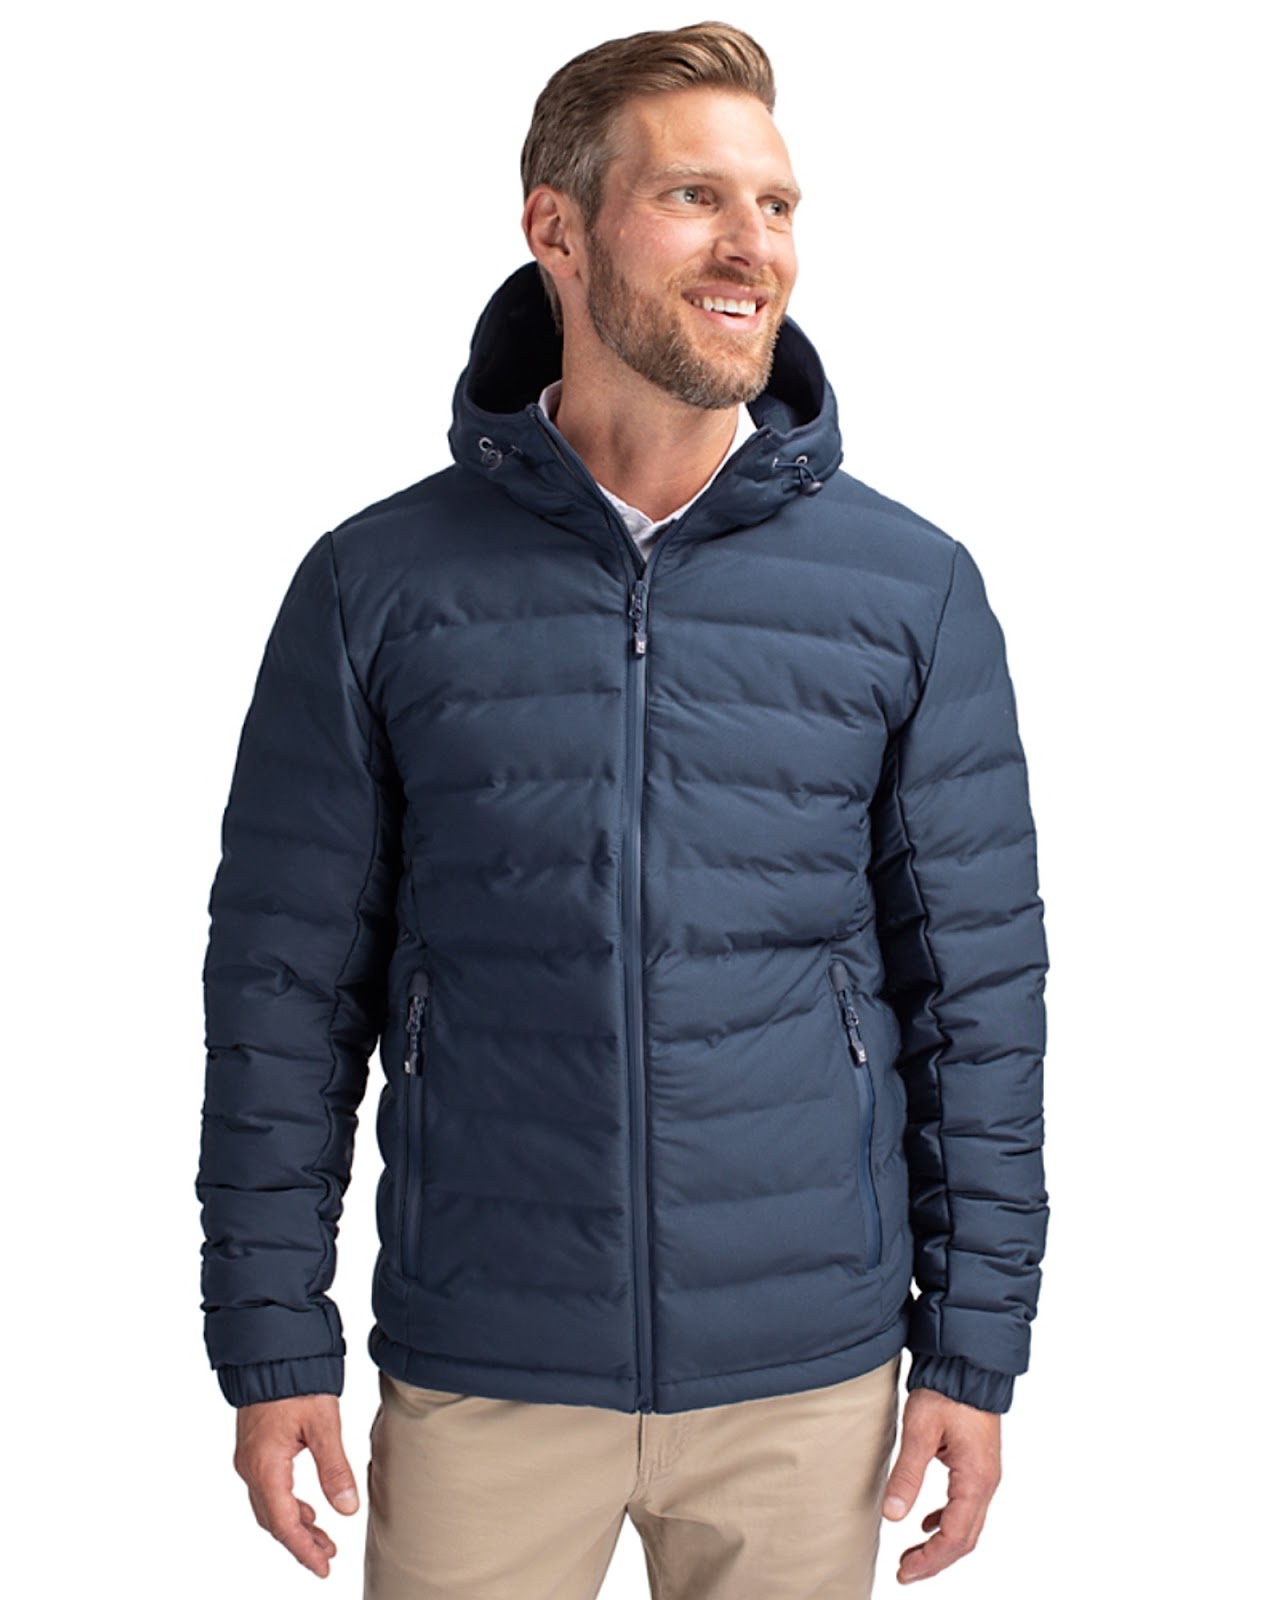 Insulated Mens Puffer Jacket for skiing & snowboarding